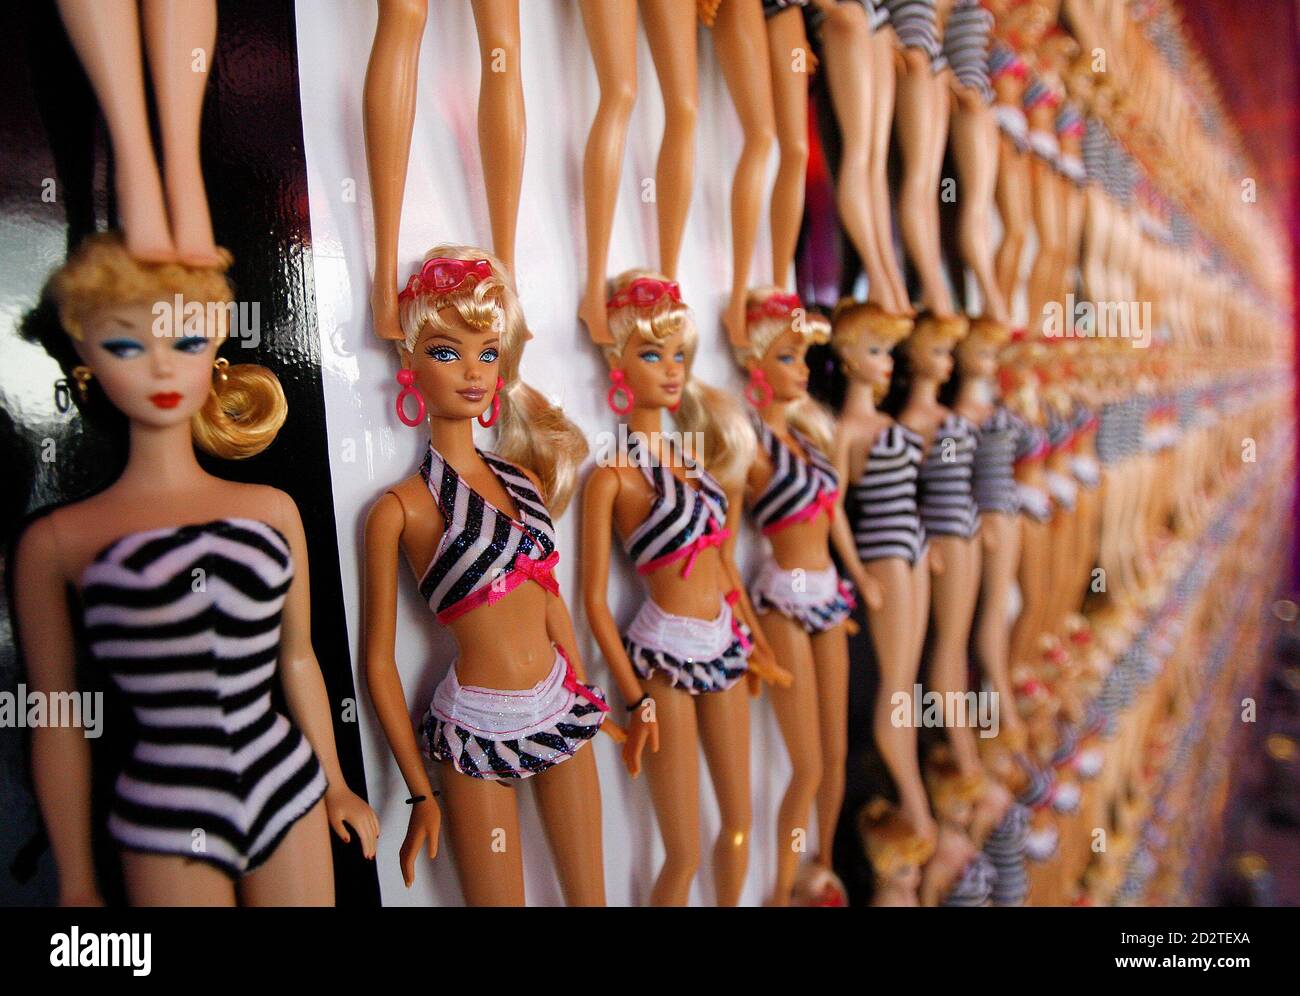 Barbie dolls are lined up on the wall at Barbie's 50th birthday party at  the Barbie real-life Malibu Dream House in Malibu, California March 9,  2009. REUTERS/Mario Anzuoni (UNITED STATES ENTERTAINMENT BUSINESS